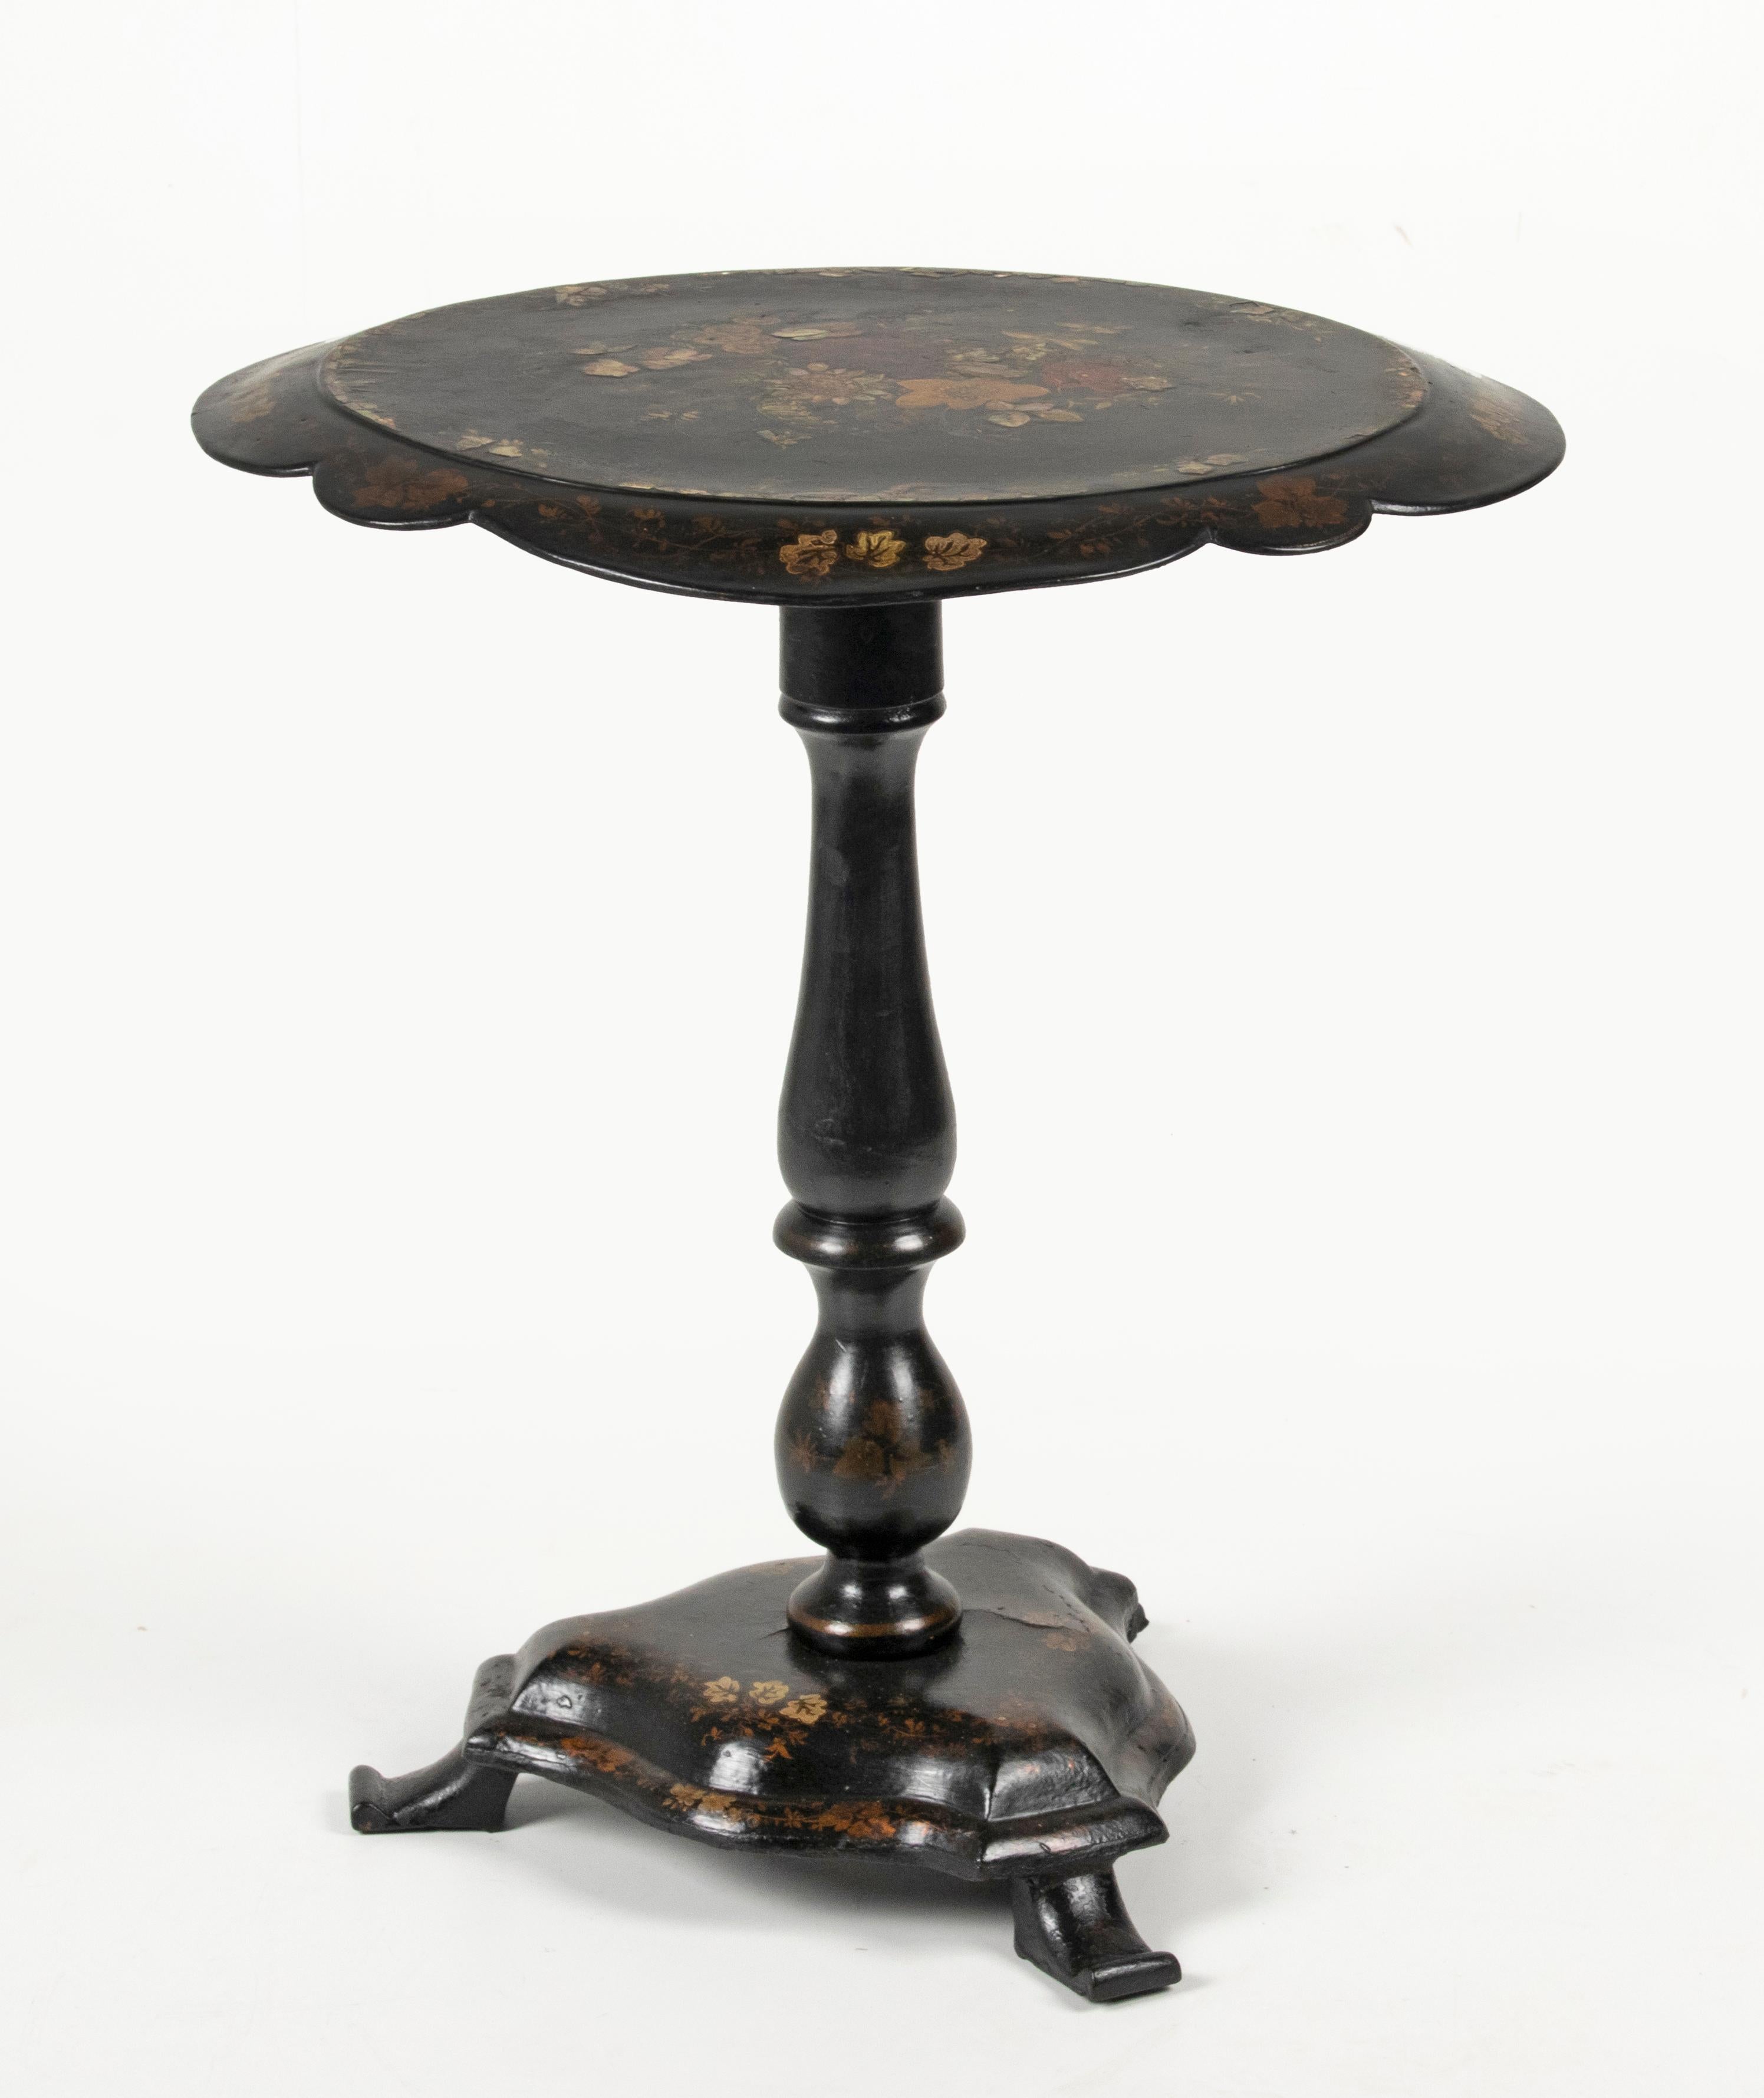 An antique English lacquer Papier Mâché tilt top occasional table, hand painted with floral motifs and inlaid with mother-of-pearl. The scalloped top and base made of paper-mache, that was fashion during the Victorian period. The spine is made of